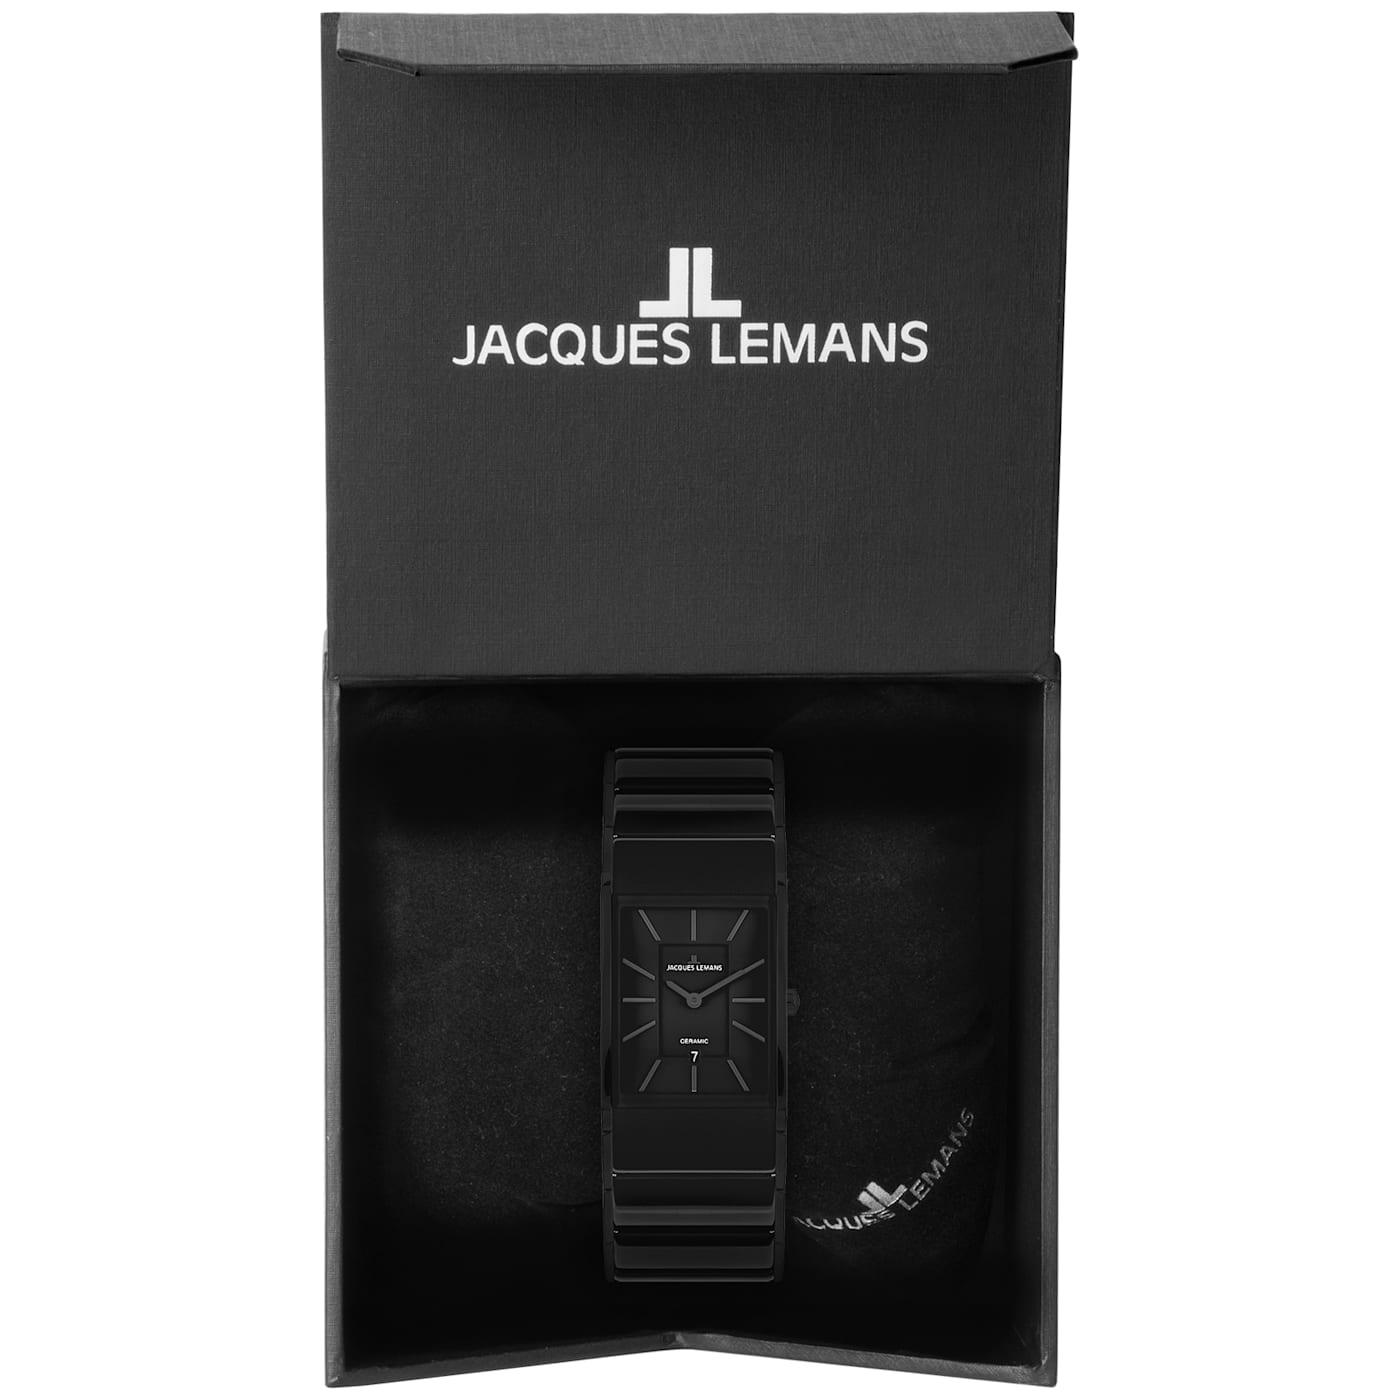 JACQUES LEMANS Dublin Men\'s Watch with High-Tech Ceramic Strap, Stainless  Steel IP-Black, 1-1939 - 12CX7A